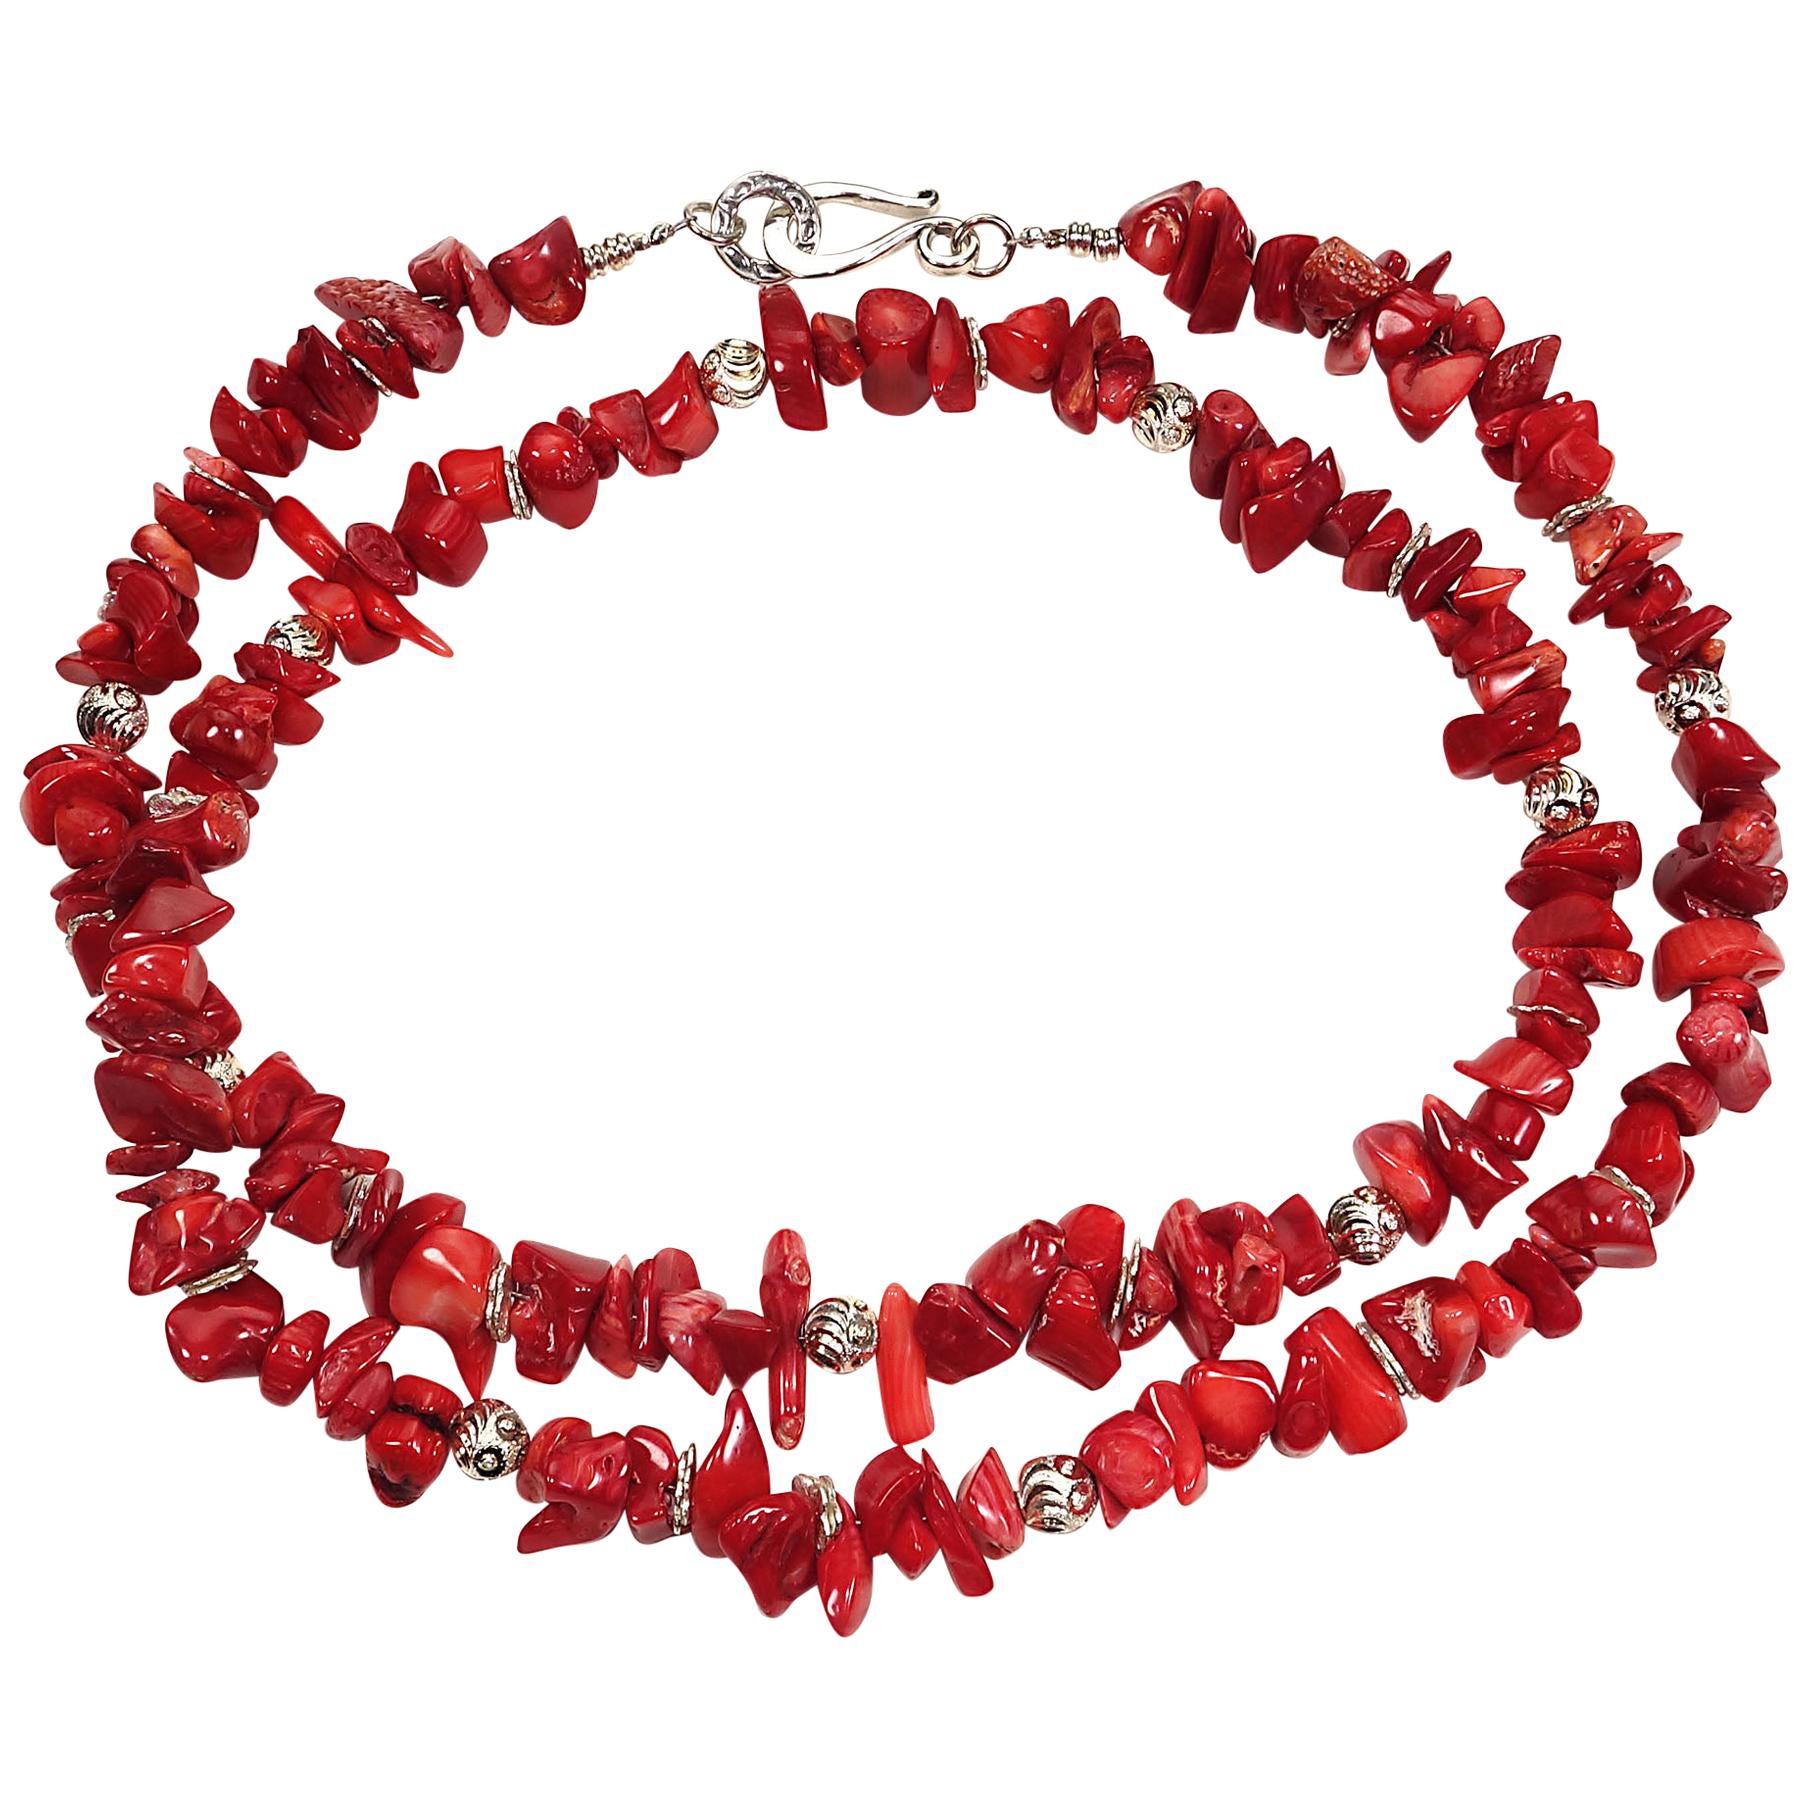 27 Inch necklace of Red Coral chips with silver toned accents.  These highly polished Red Coral chips are a lovely bright red and have all the natural beauty marks of coral.  This unique necklace is secured with a Sterling Silver hook and eye clasp.